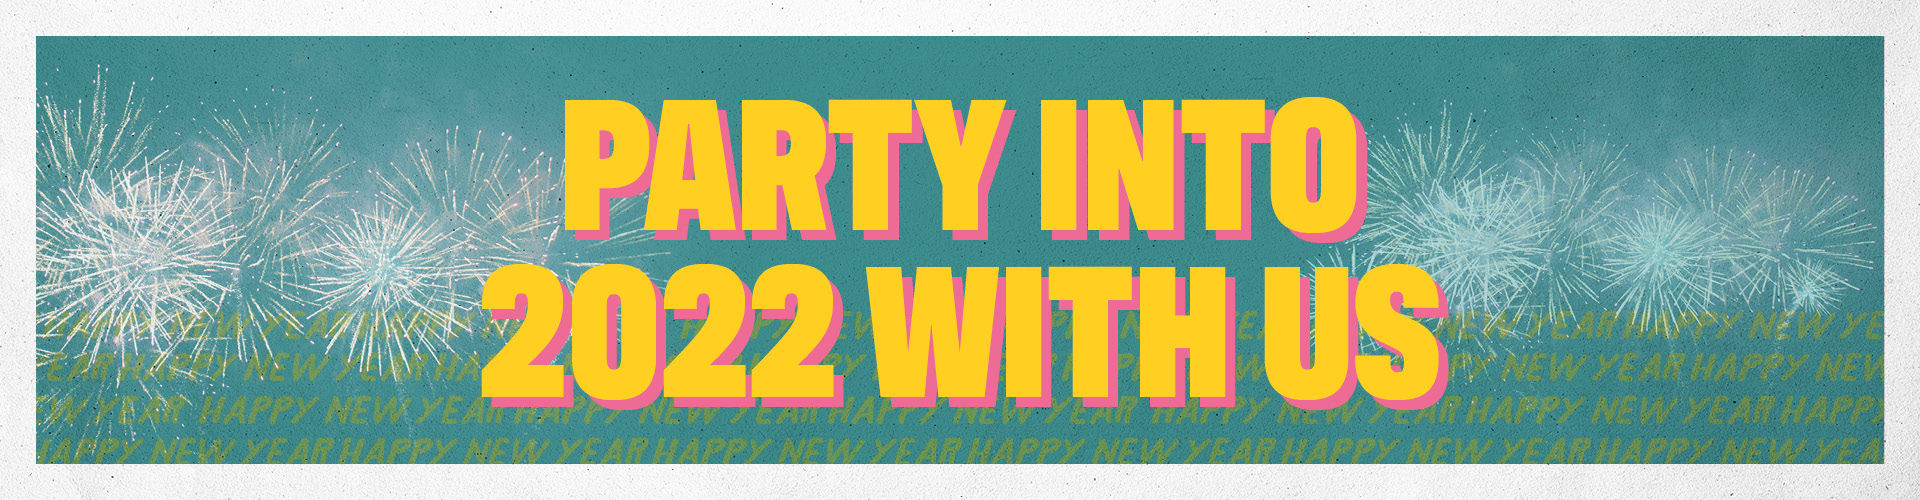 Party into 2022 with us